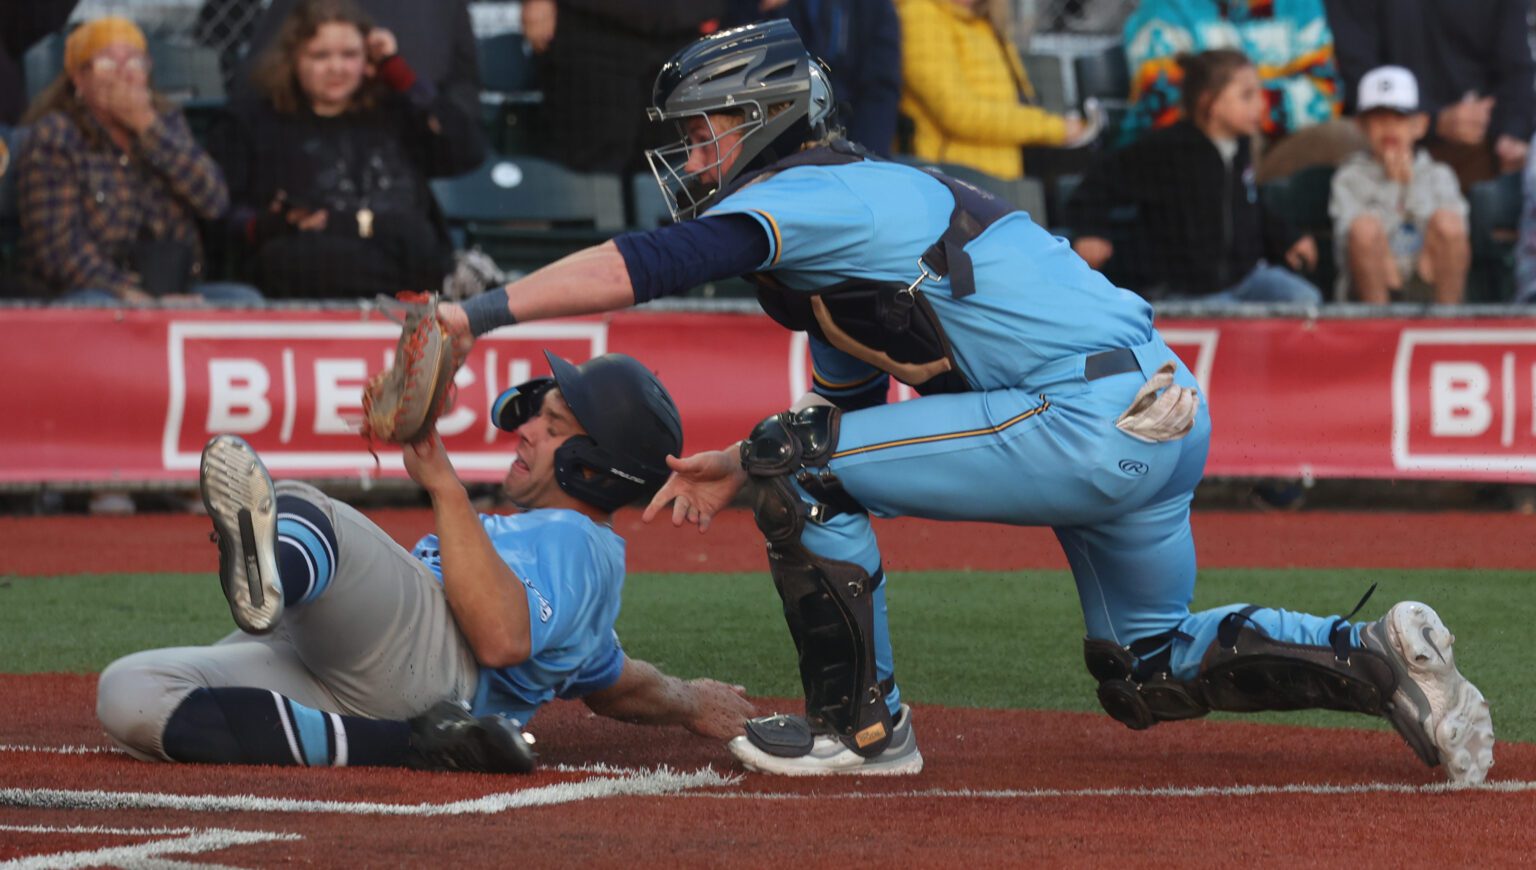 Bellingham Bells' catcher Cole Williams gets the tag at home plate June 2 to seal a 2-1 win over the Edmonton Riverhawks on opening day at Joe Martin Stadium.